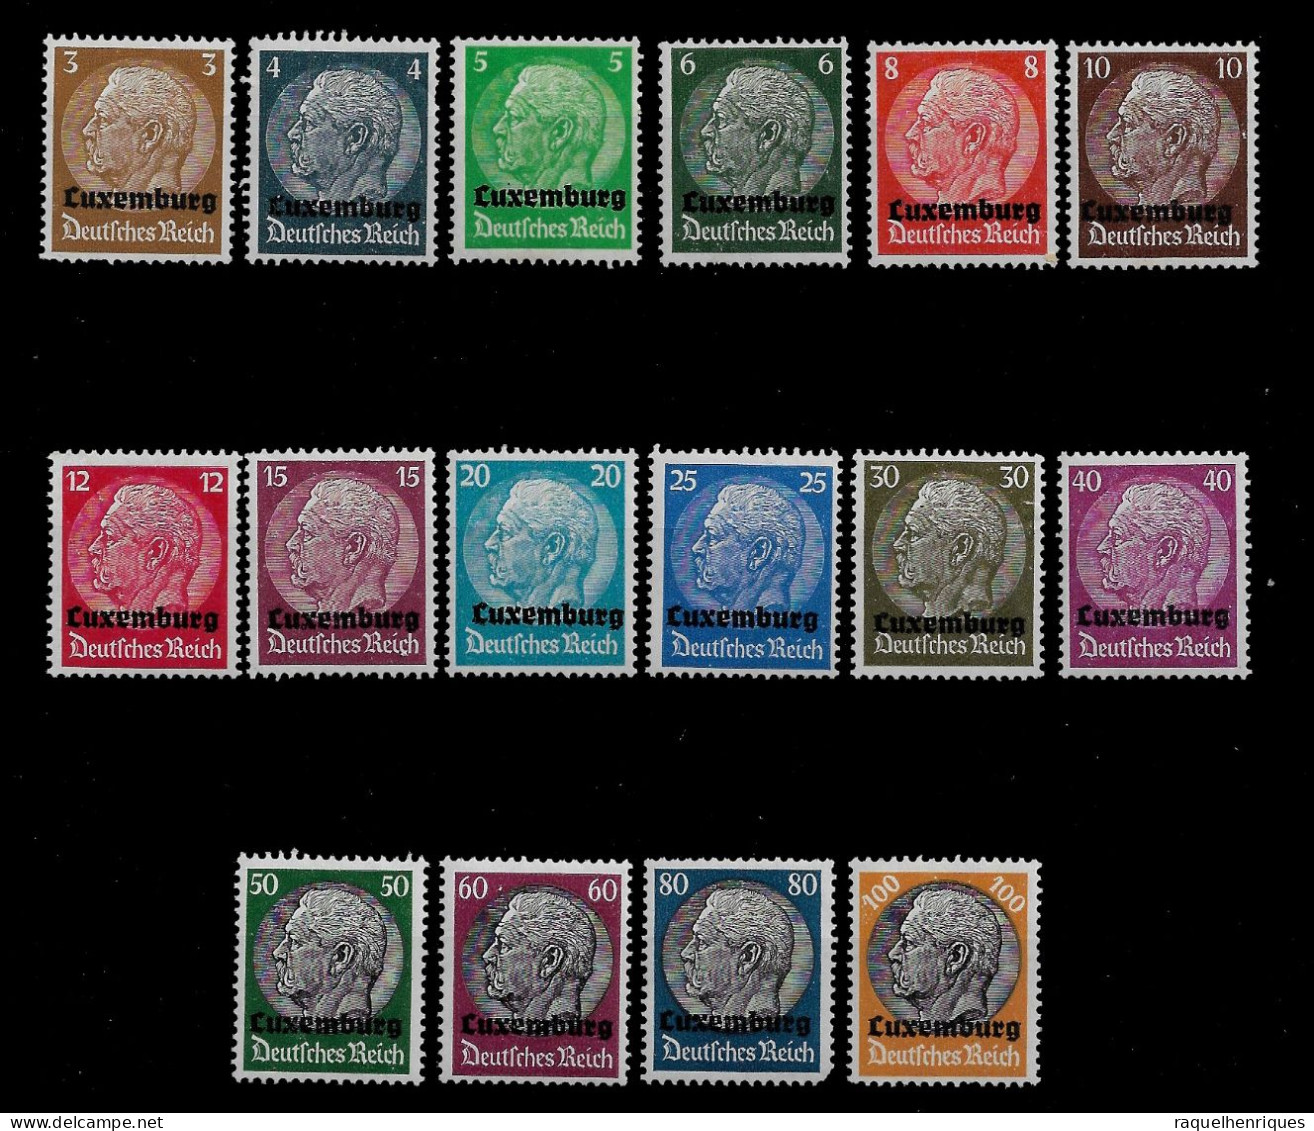 LUXEMBOURG GERMAN OCCUPATION - 1940 German Empire Postage Stamps Overprinted "Luxemburg" SET MNH (STB10-A05) - 1940-1944 Occupation Allemande